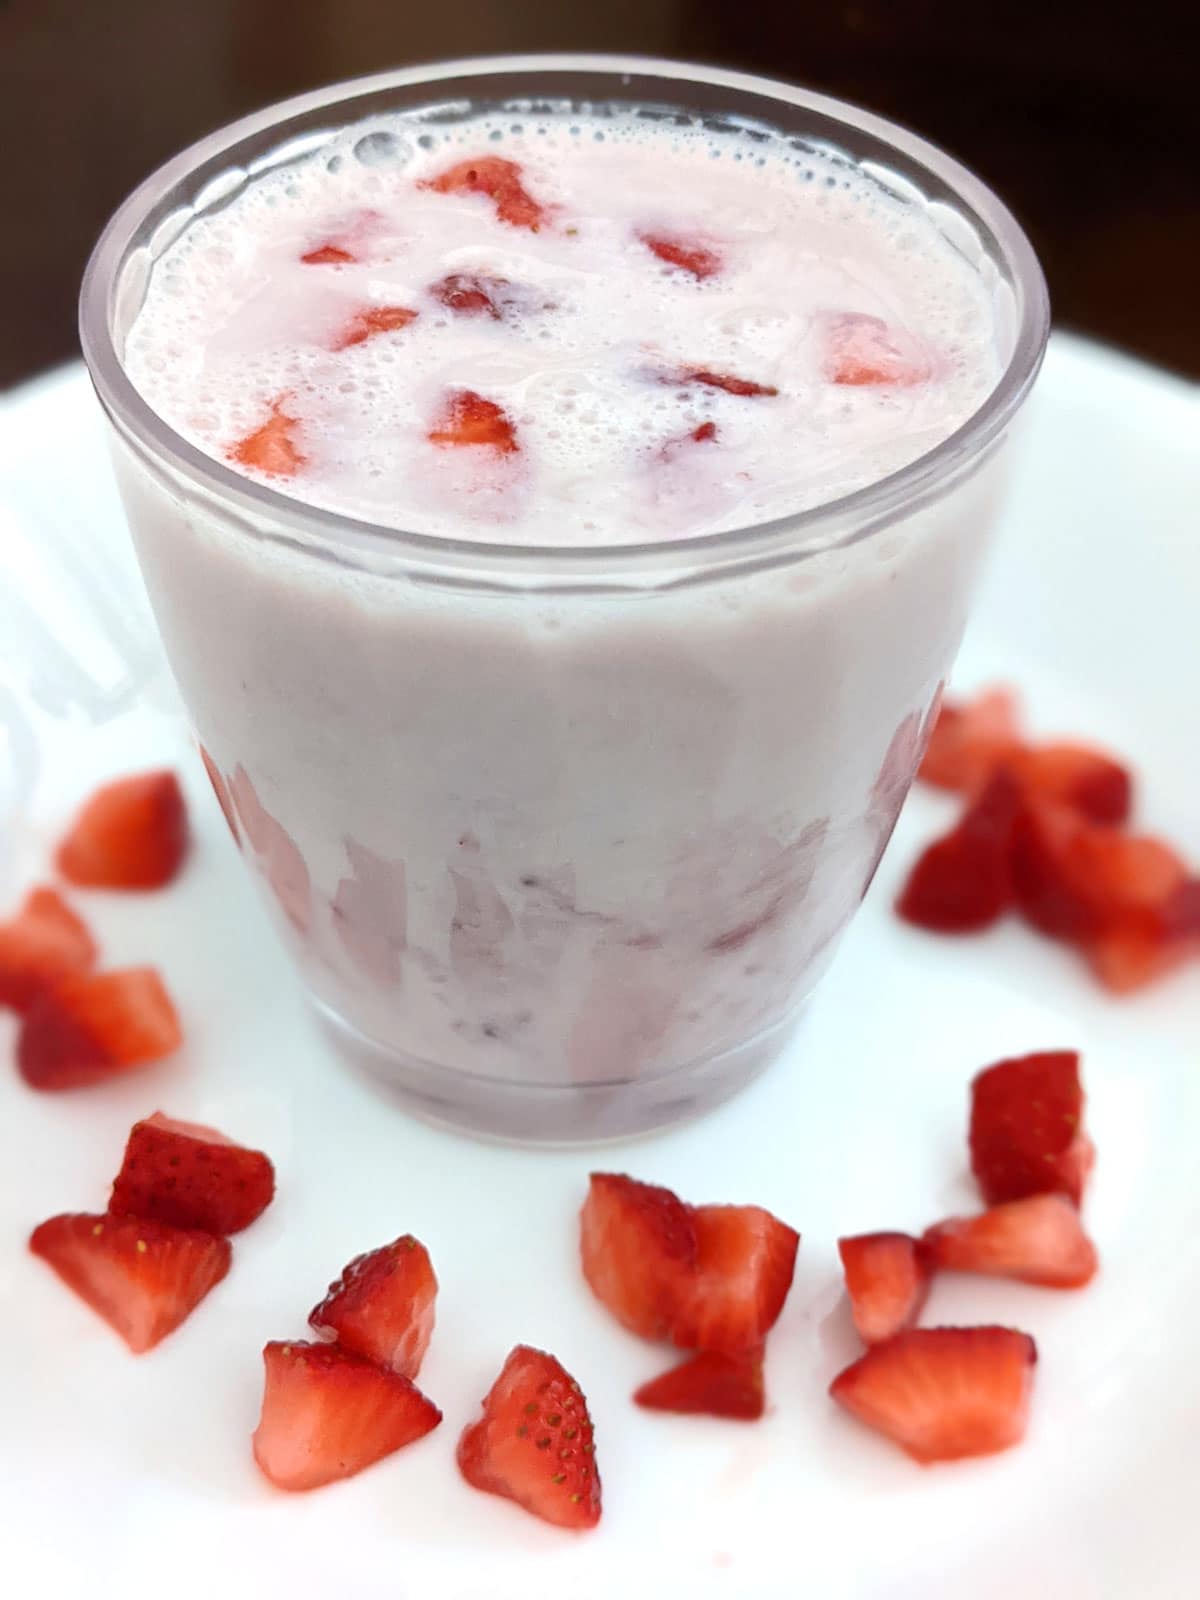 strawberry milk with homemade strawberry syrup